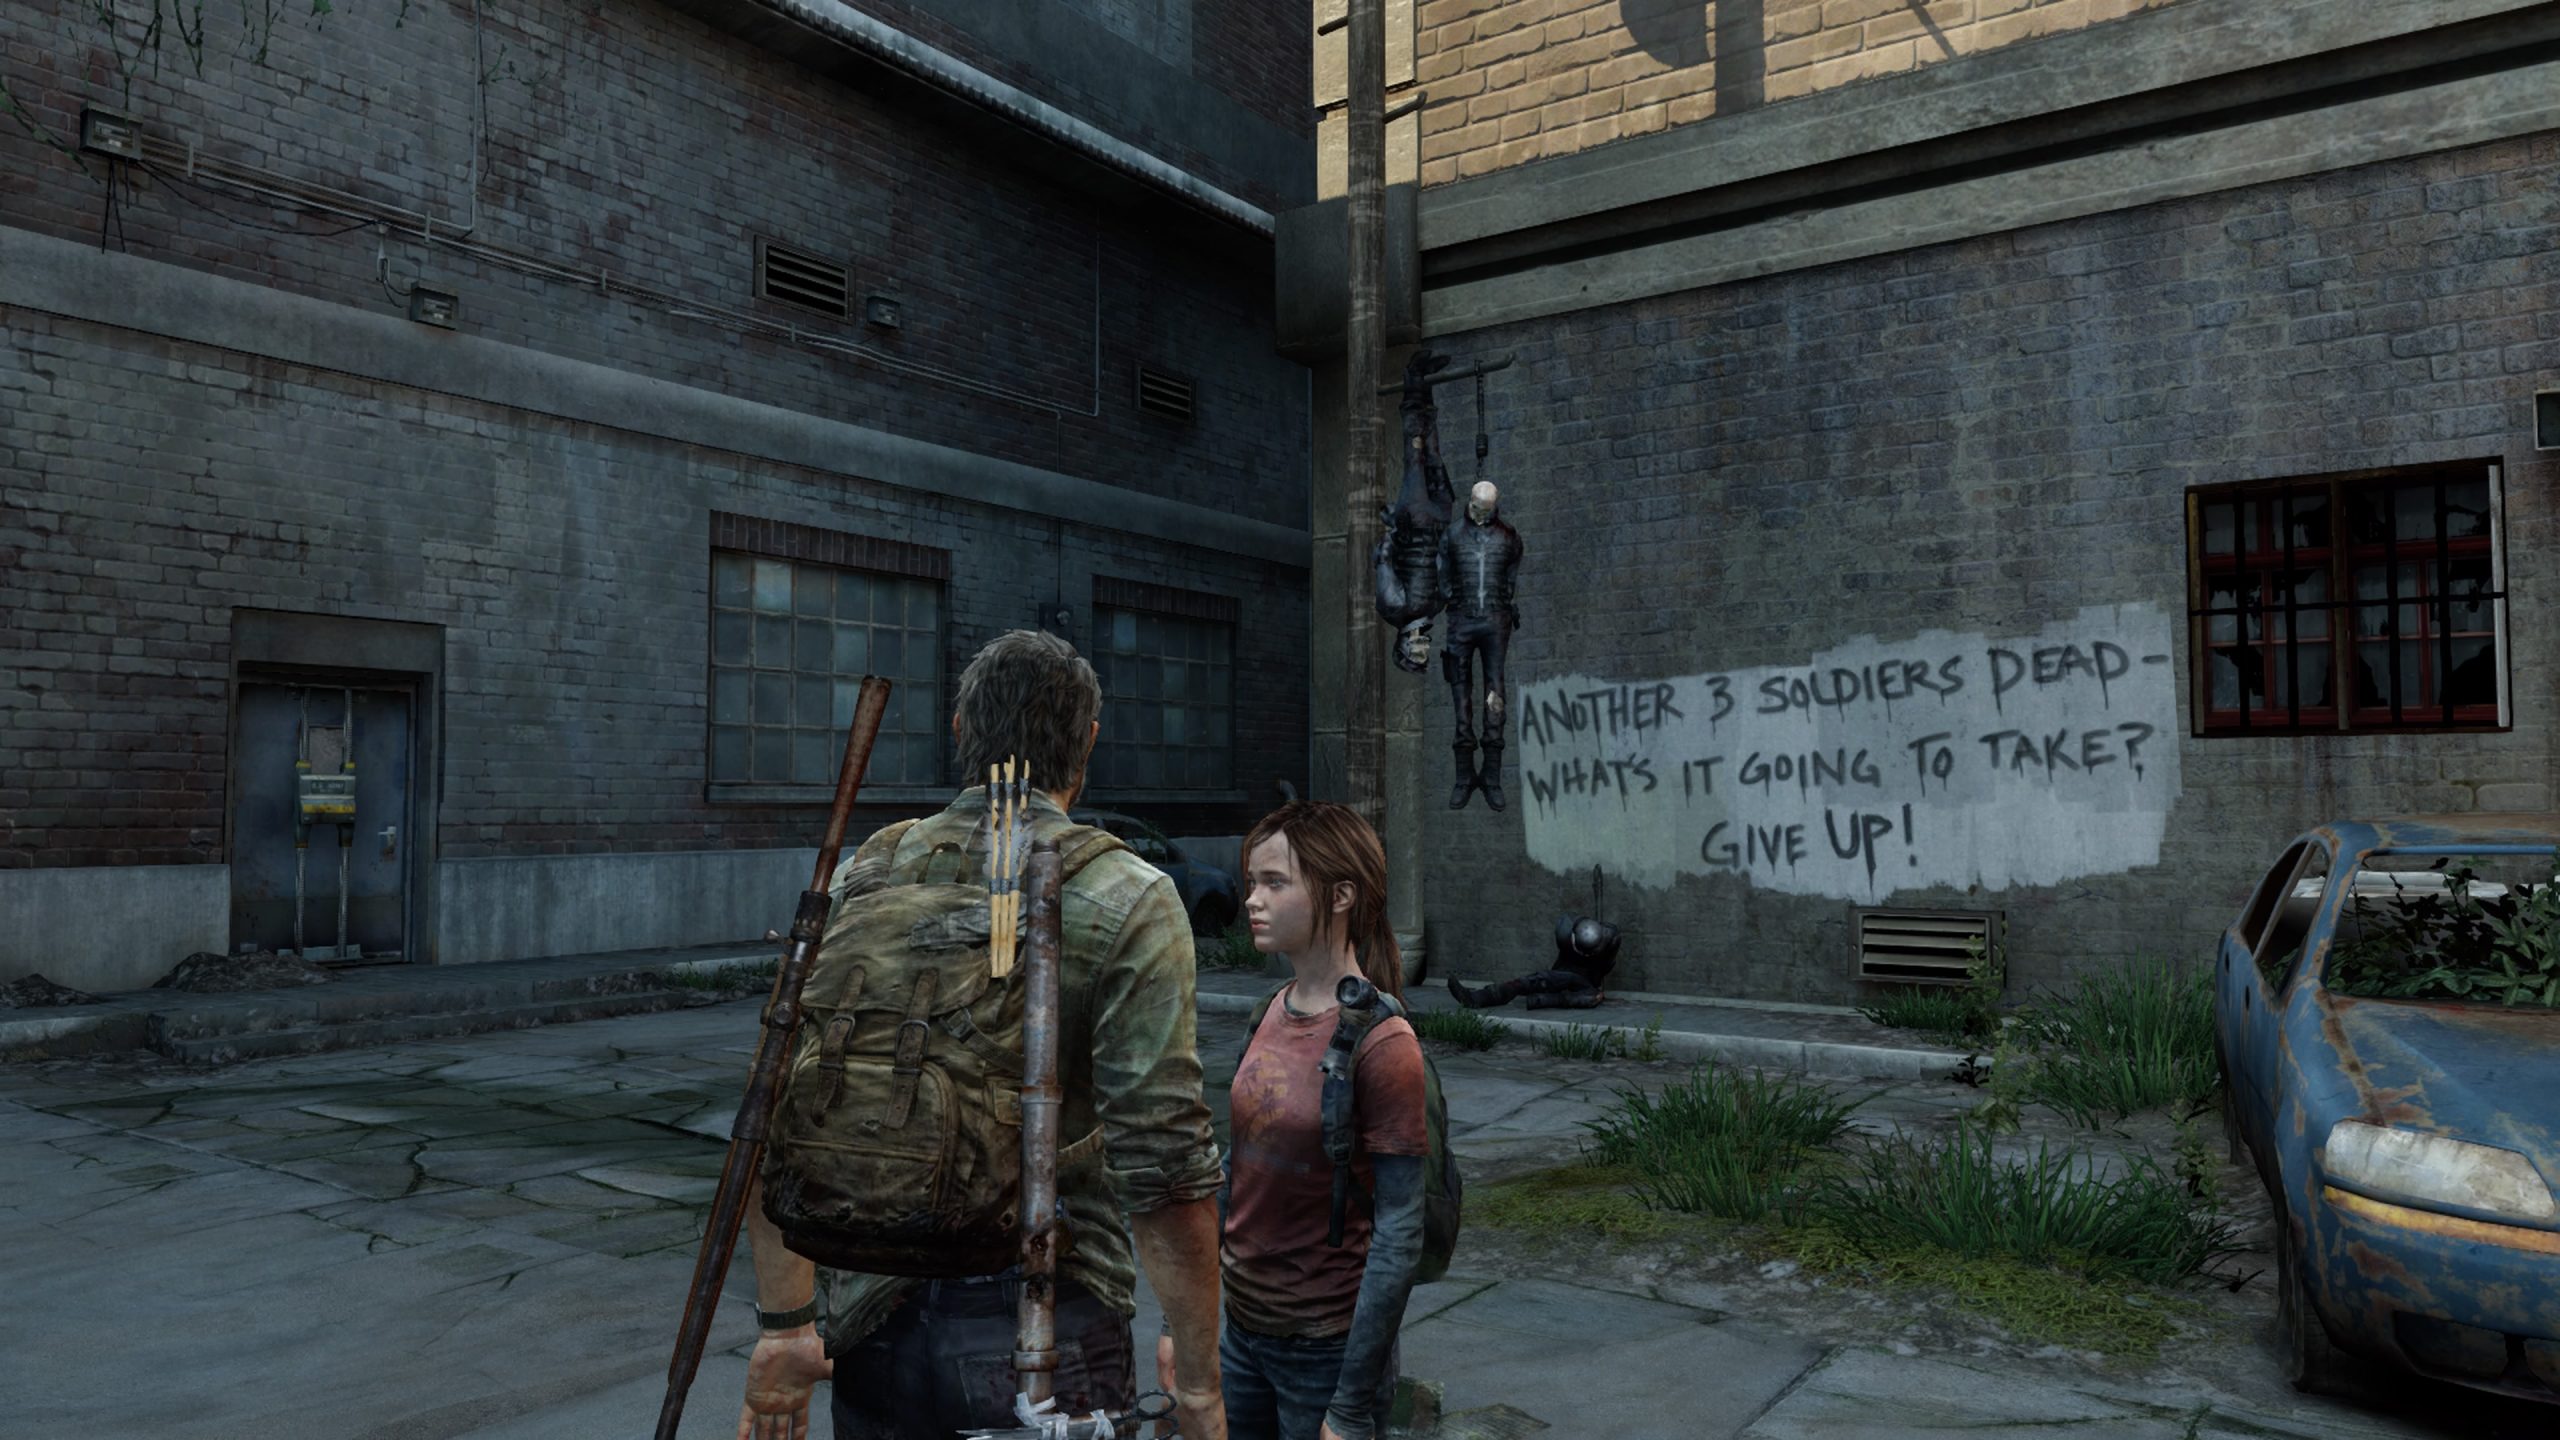 DISCUSSÃO OFICIAL] The Last of Us  Episódio 4 : Please Hold on to My Hand  : r/jovemnerd